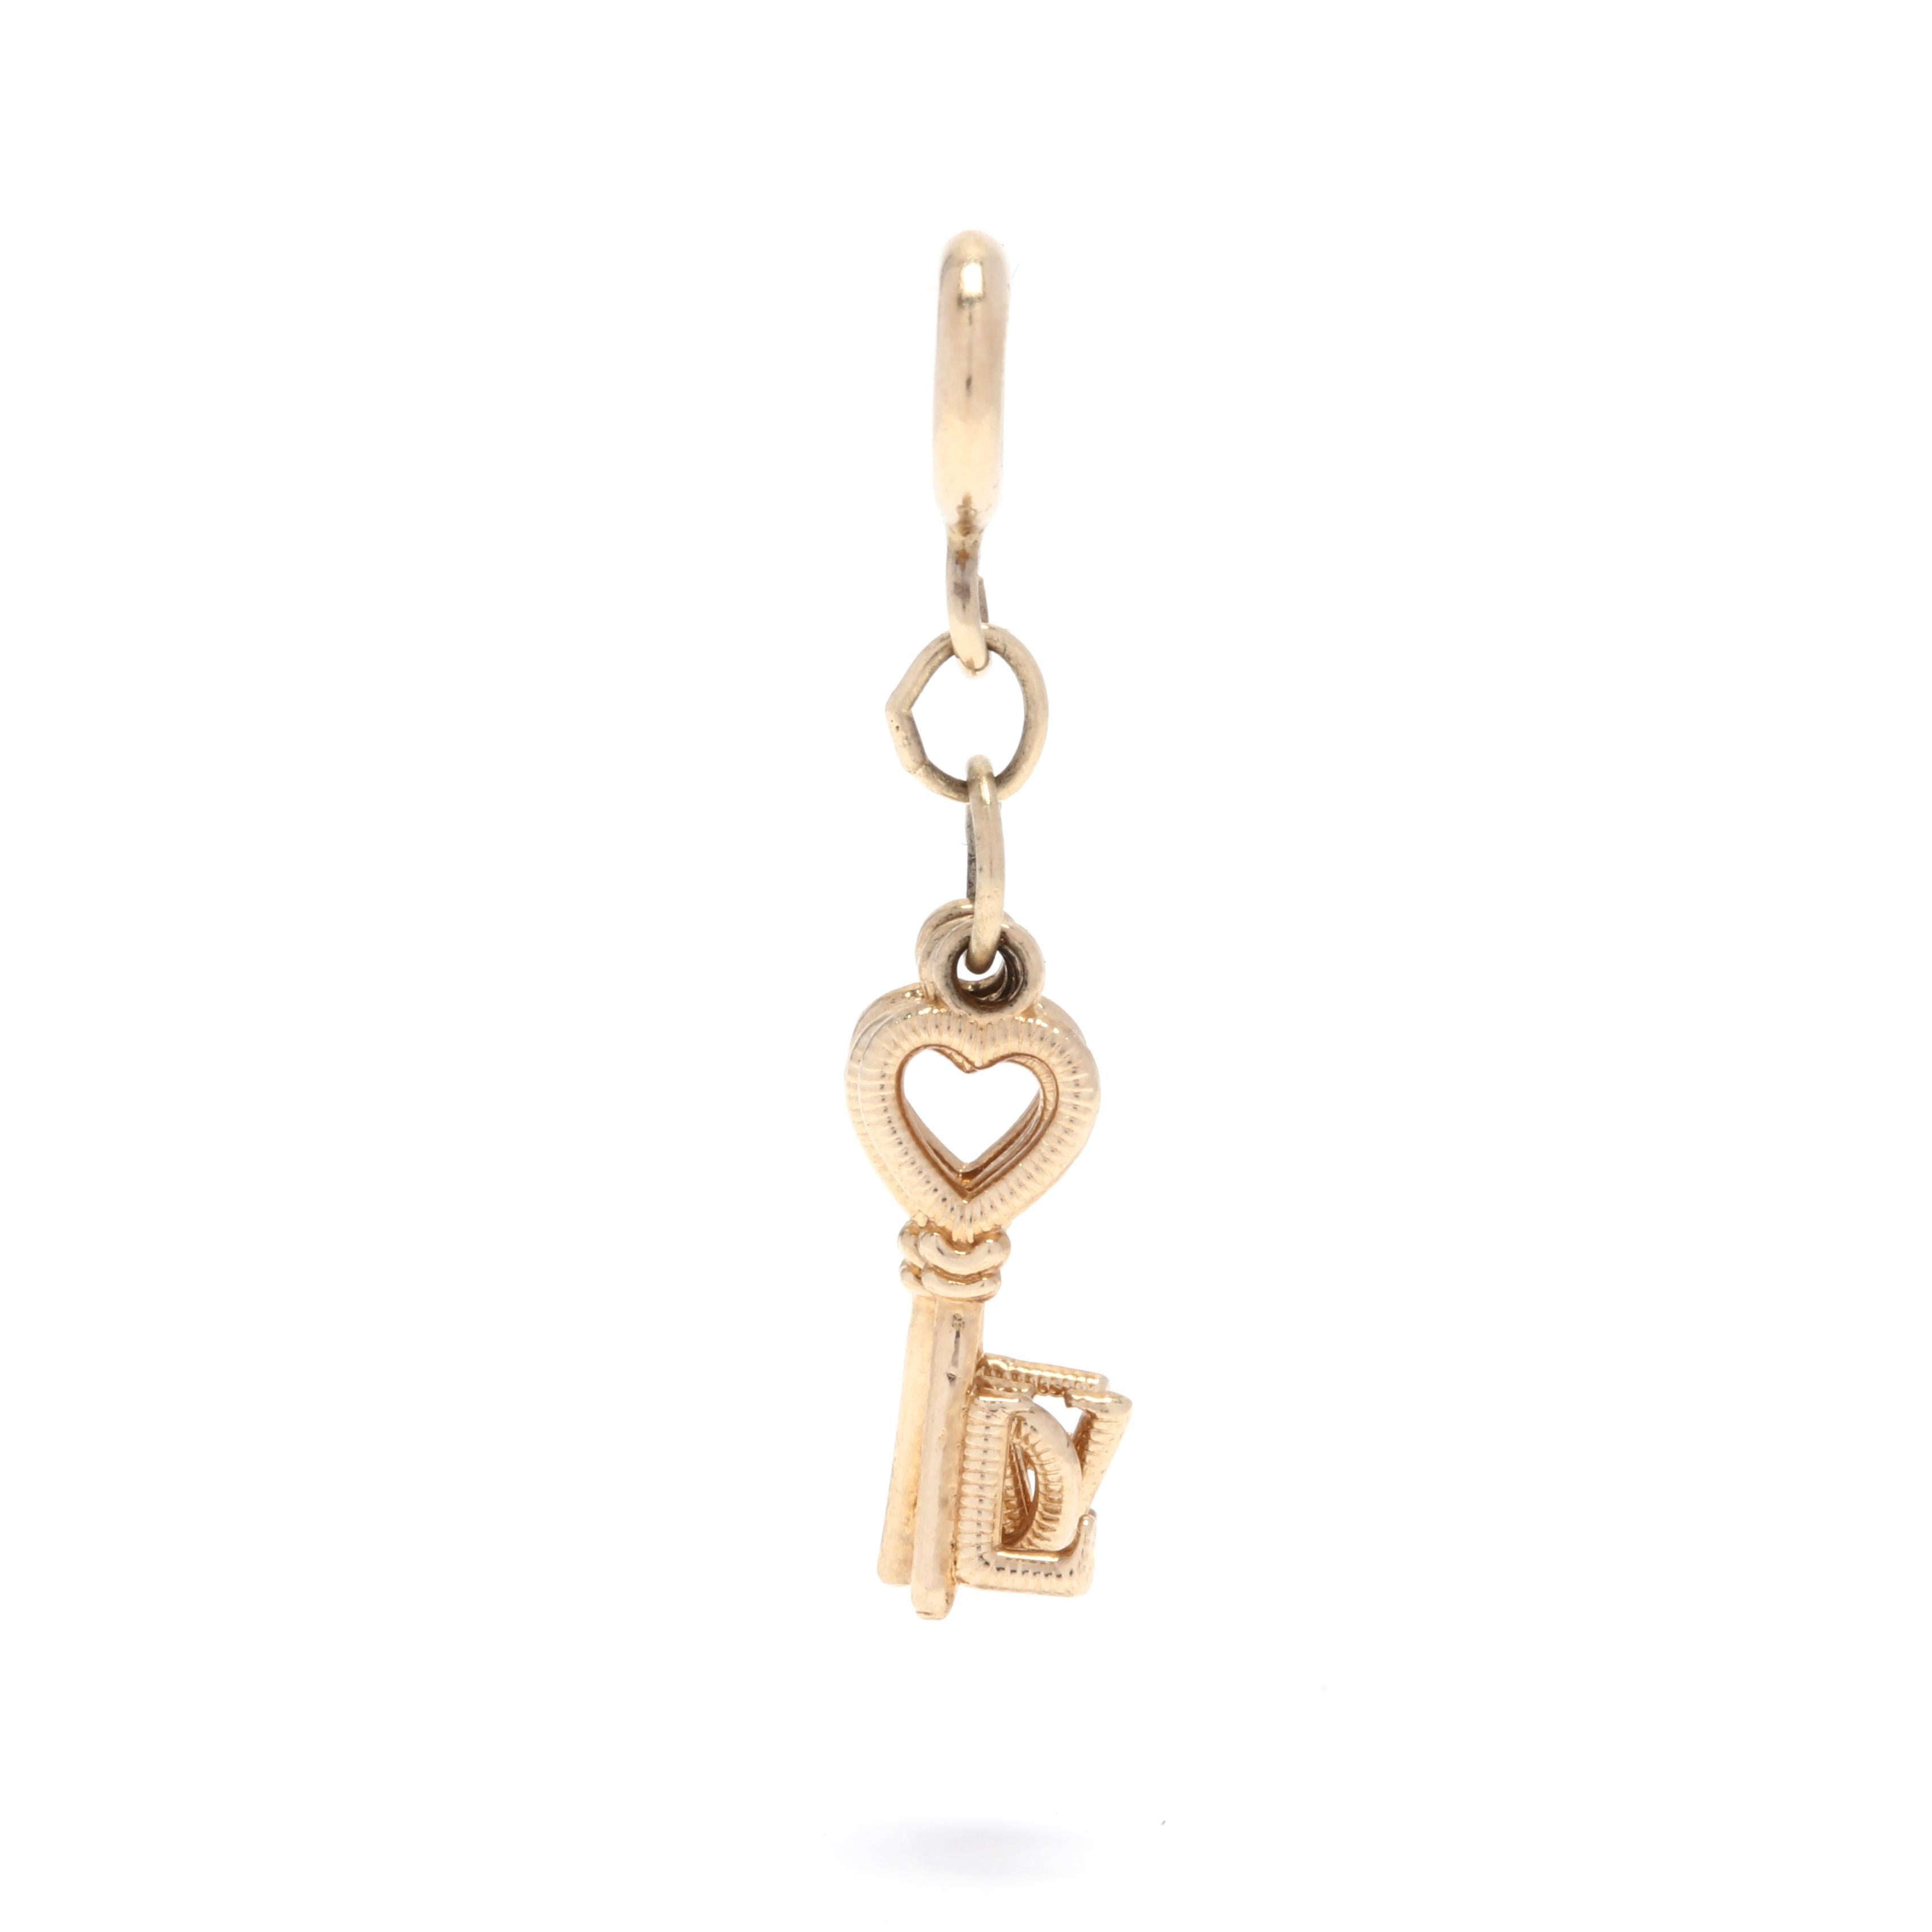 A 14 karat yellow gold 'LOVE' keys charm / pendant. This pendant features four key motifs with hearts at each top and a letter at each bottom that spells out the word LOVE and a spring ring clasp.

Length: 1 1/8 in.

.62 dwts.

* Please note that